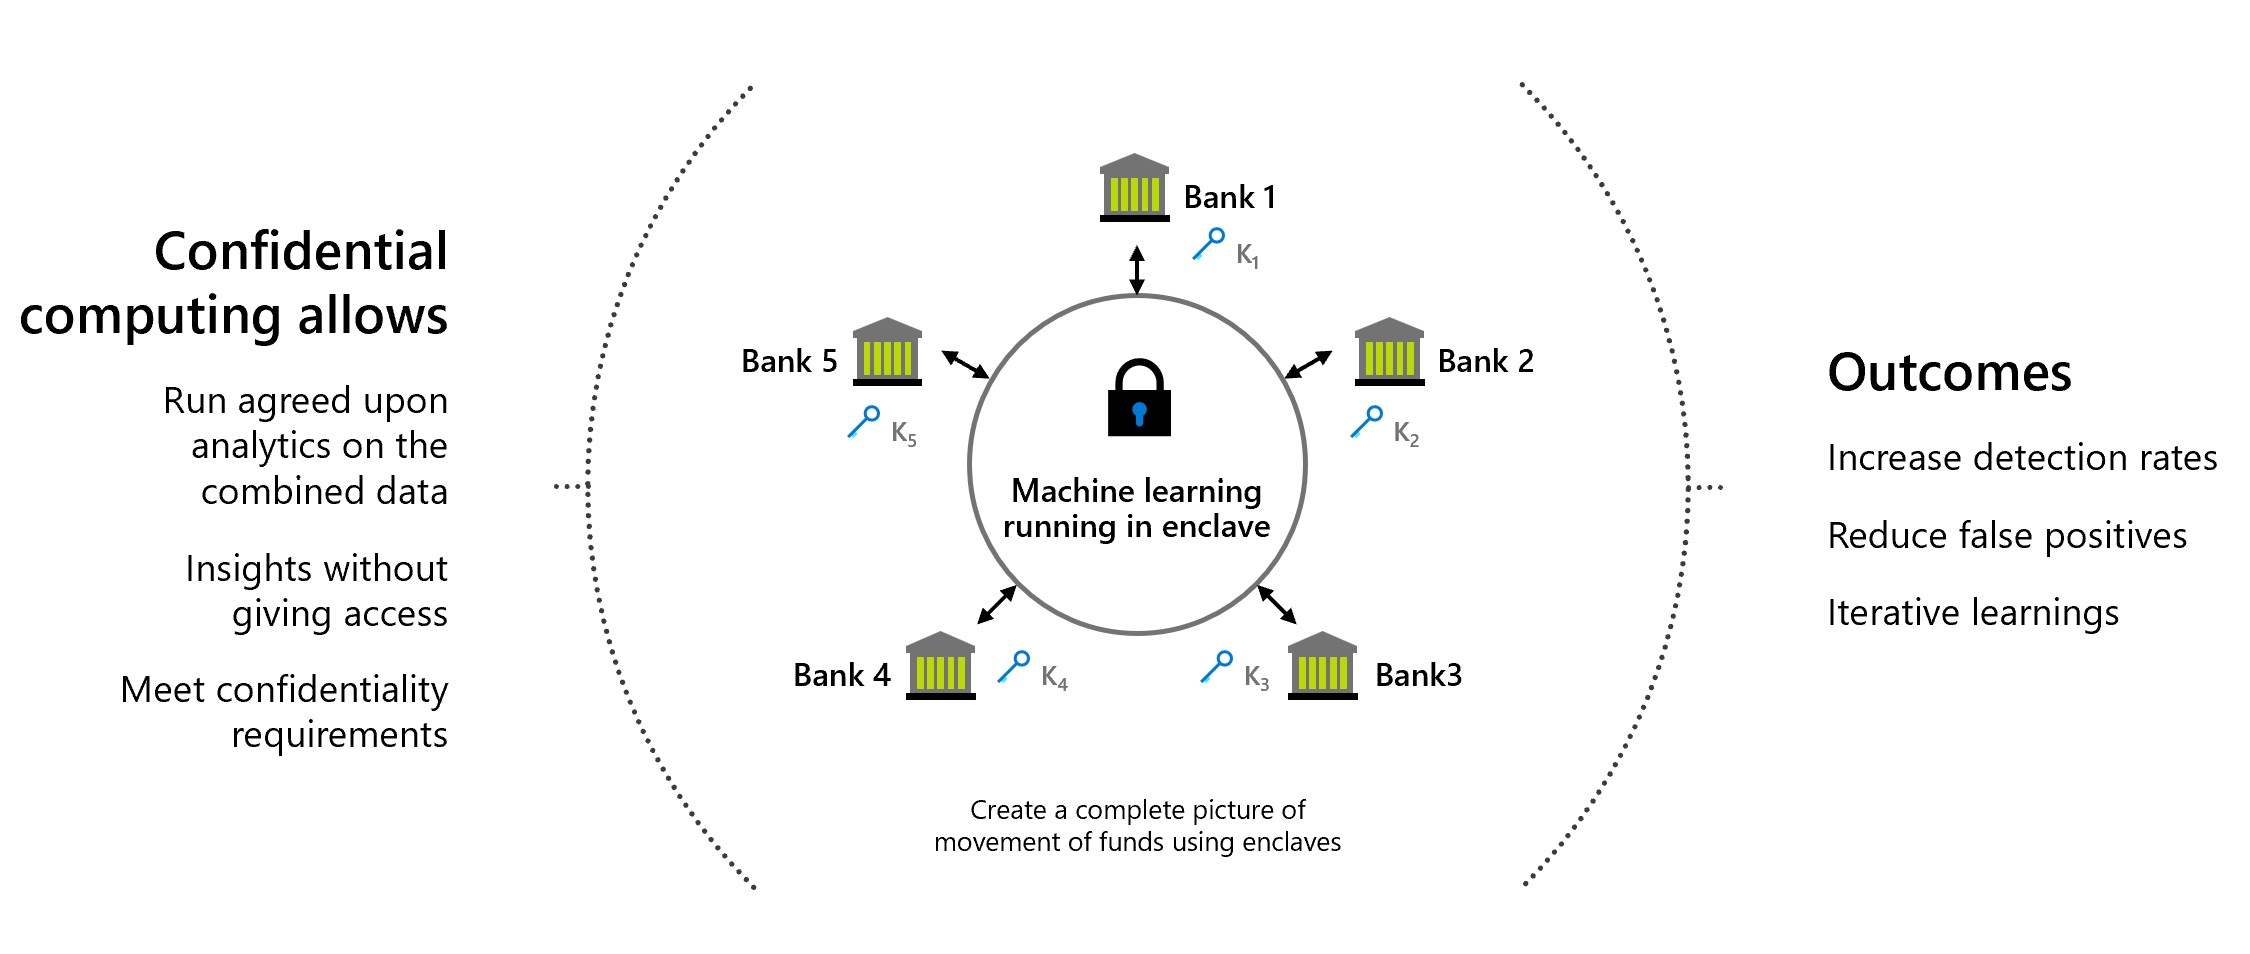 Graphic of multiparty data sharing for banks, showing the data movement that confidential computing enables.